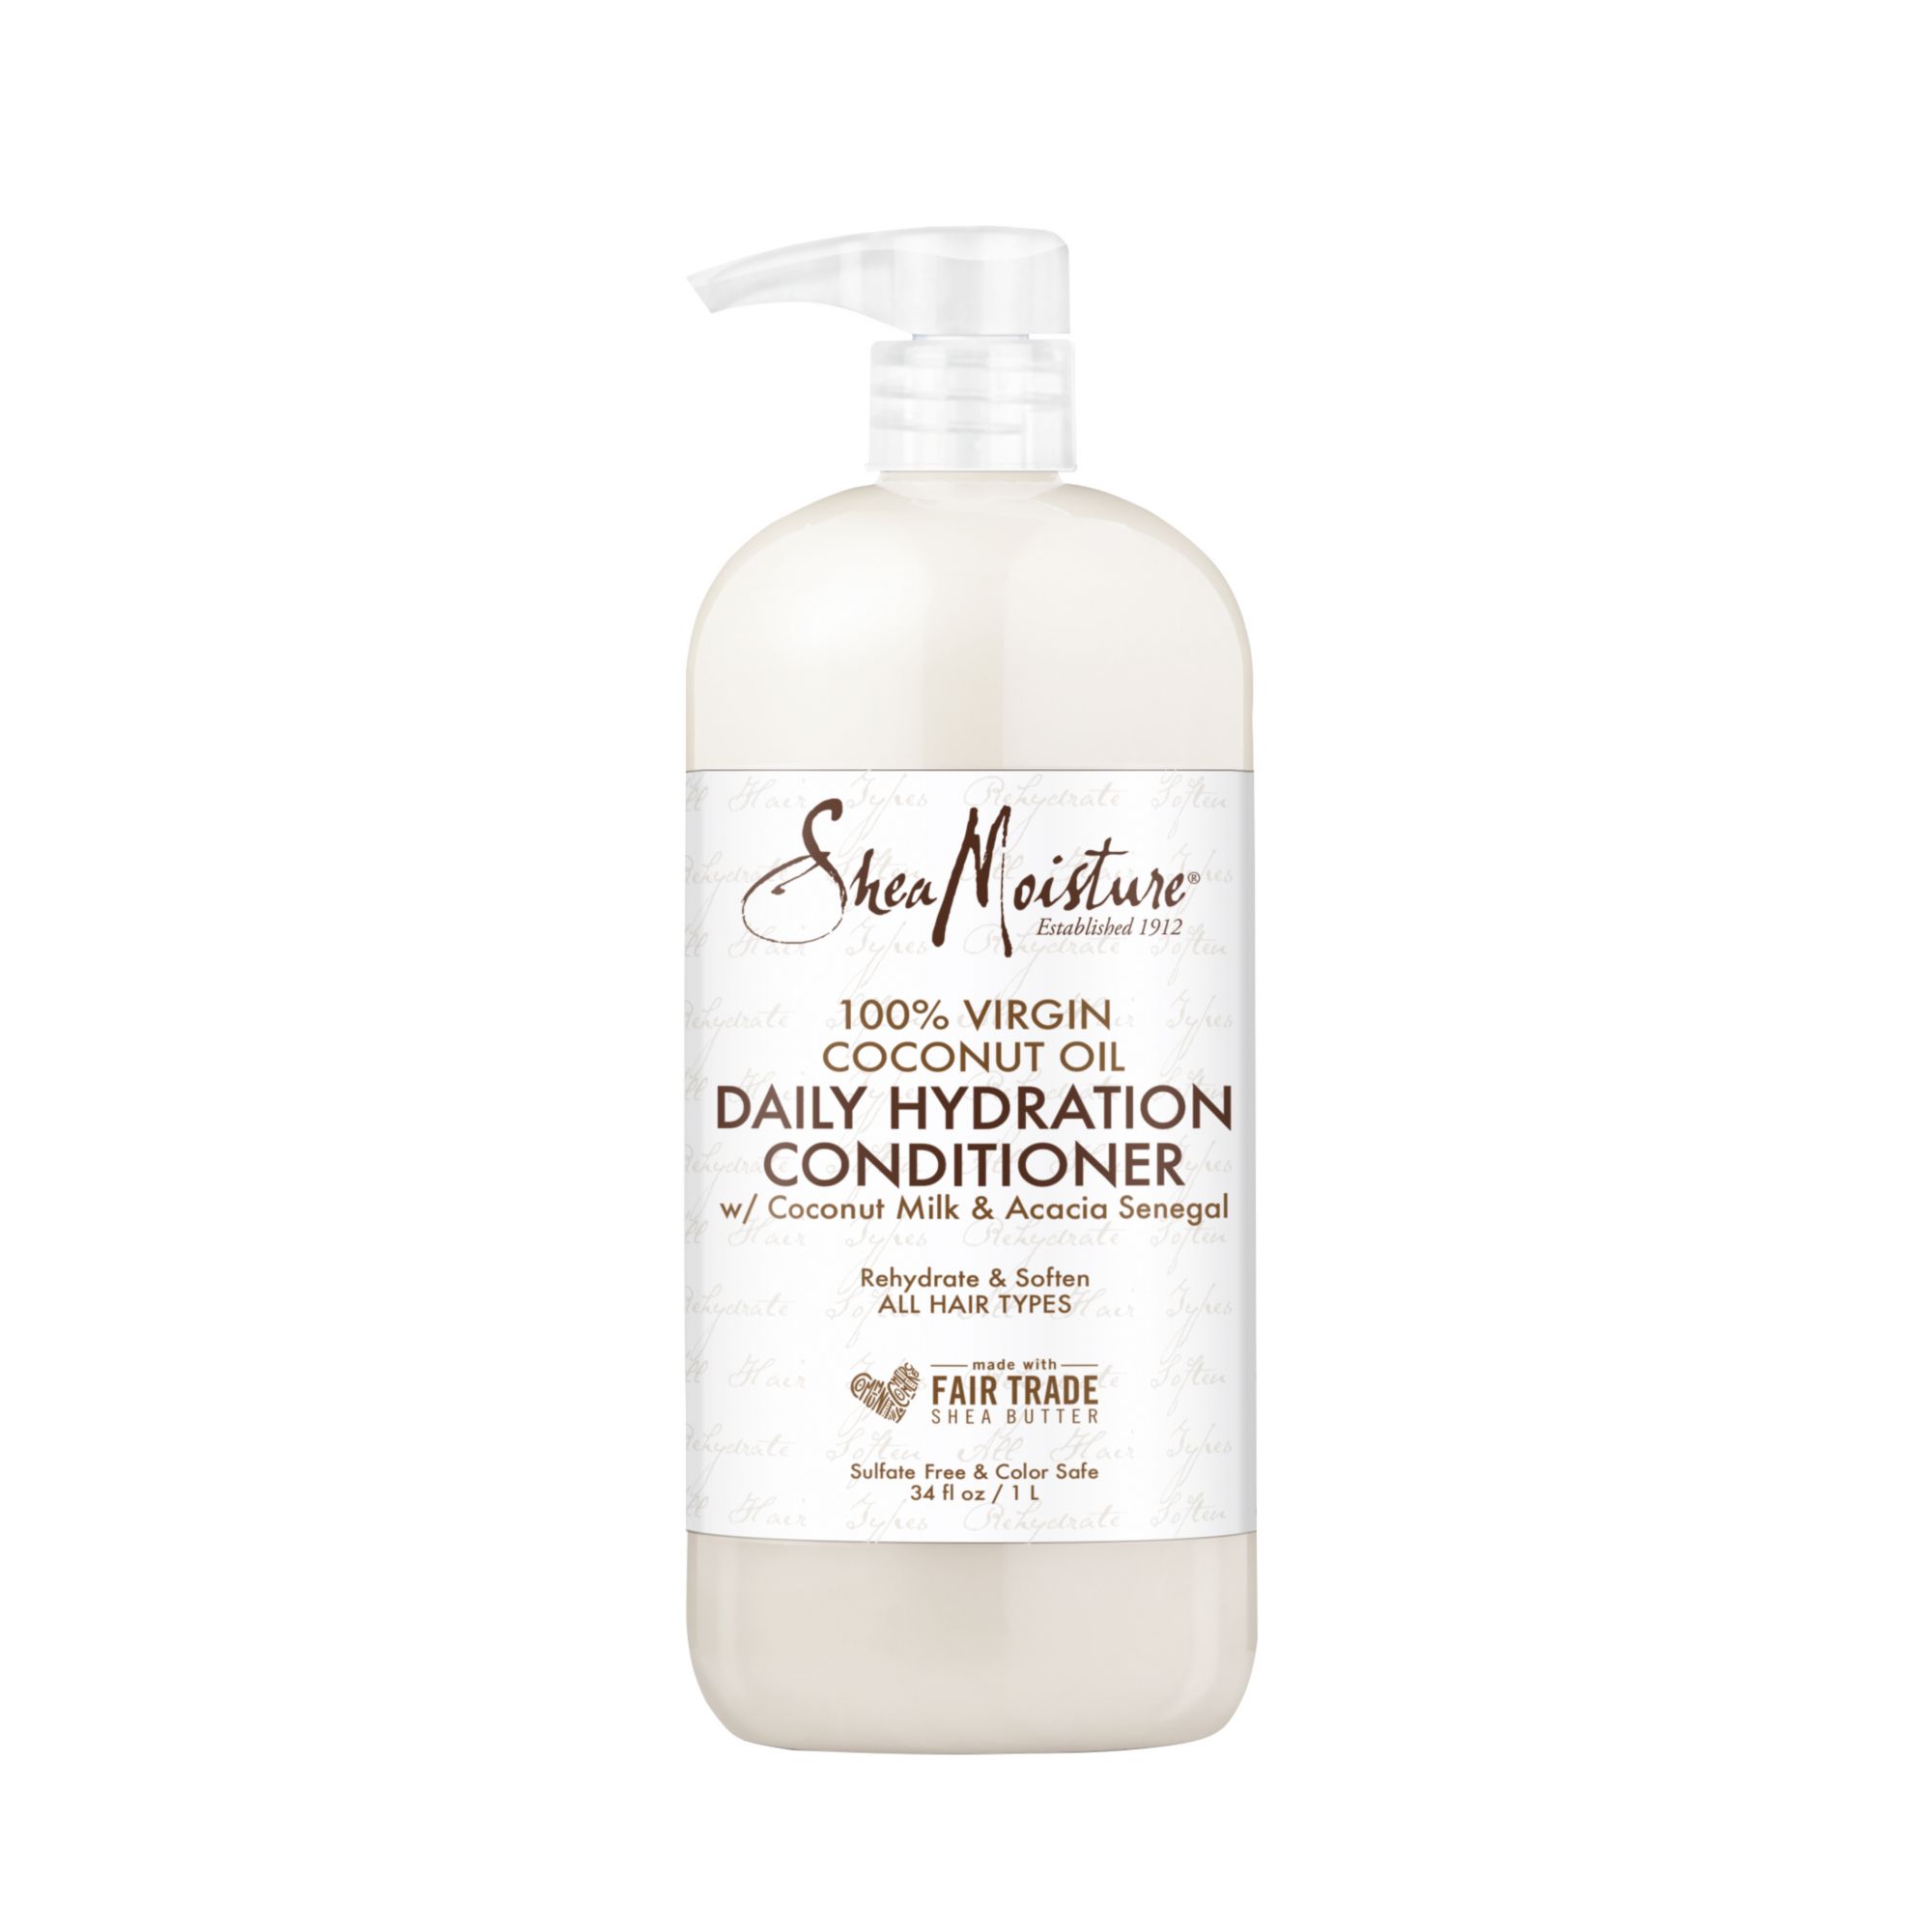 SheaMoisture Daily Hydration Conditioner for All Hair Types, Sulfate-Free, 34 oz.